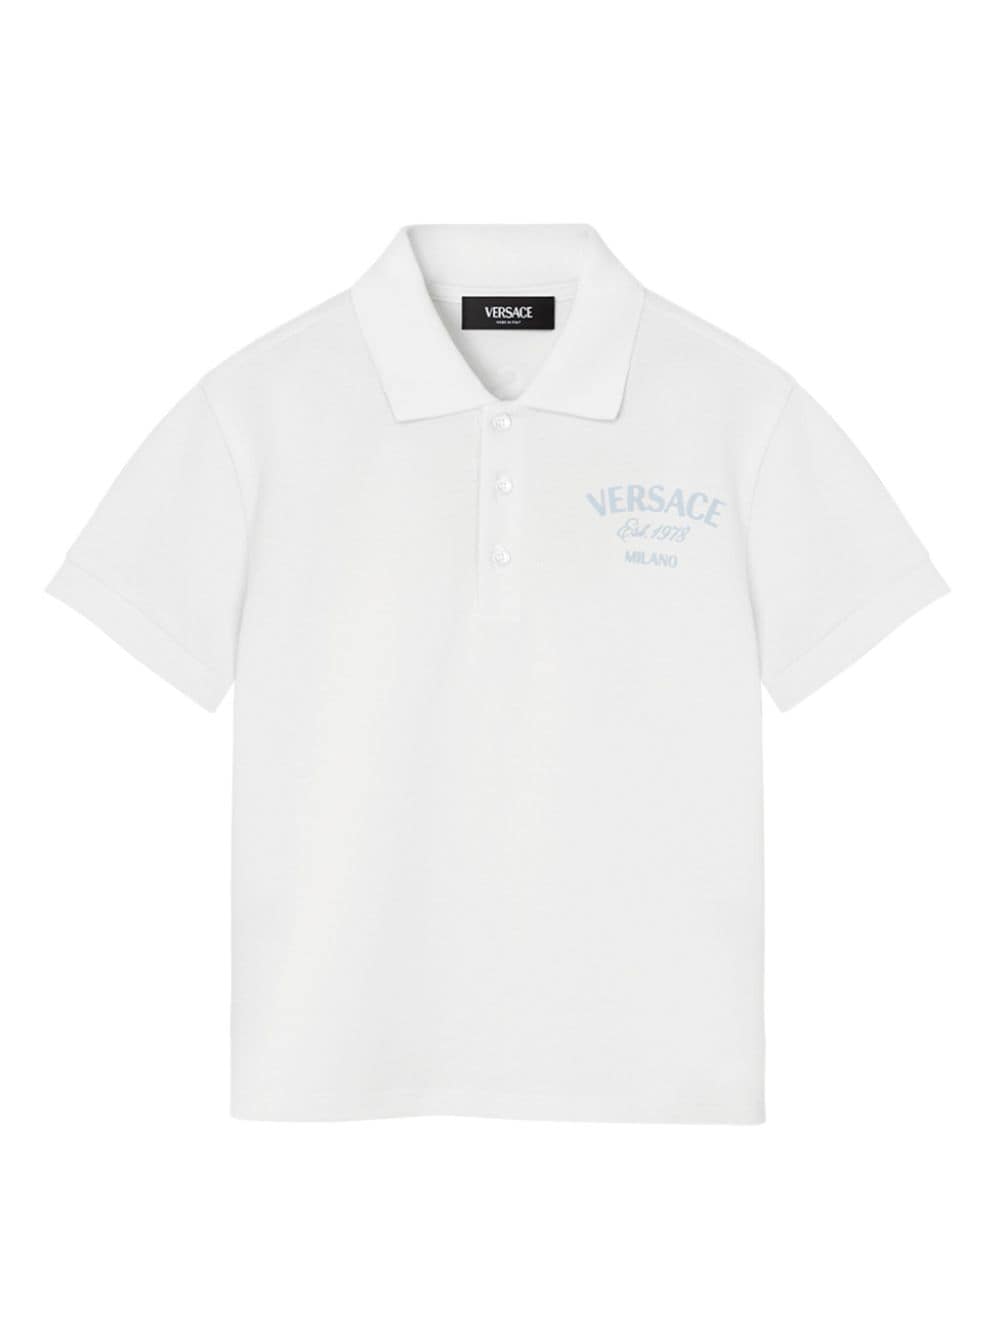 Versace Kids' Printed Polo Shirt In White